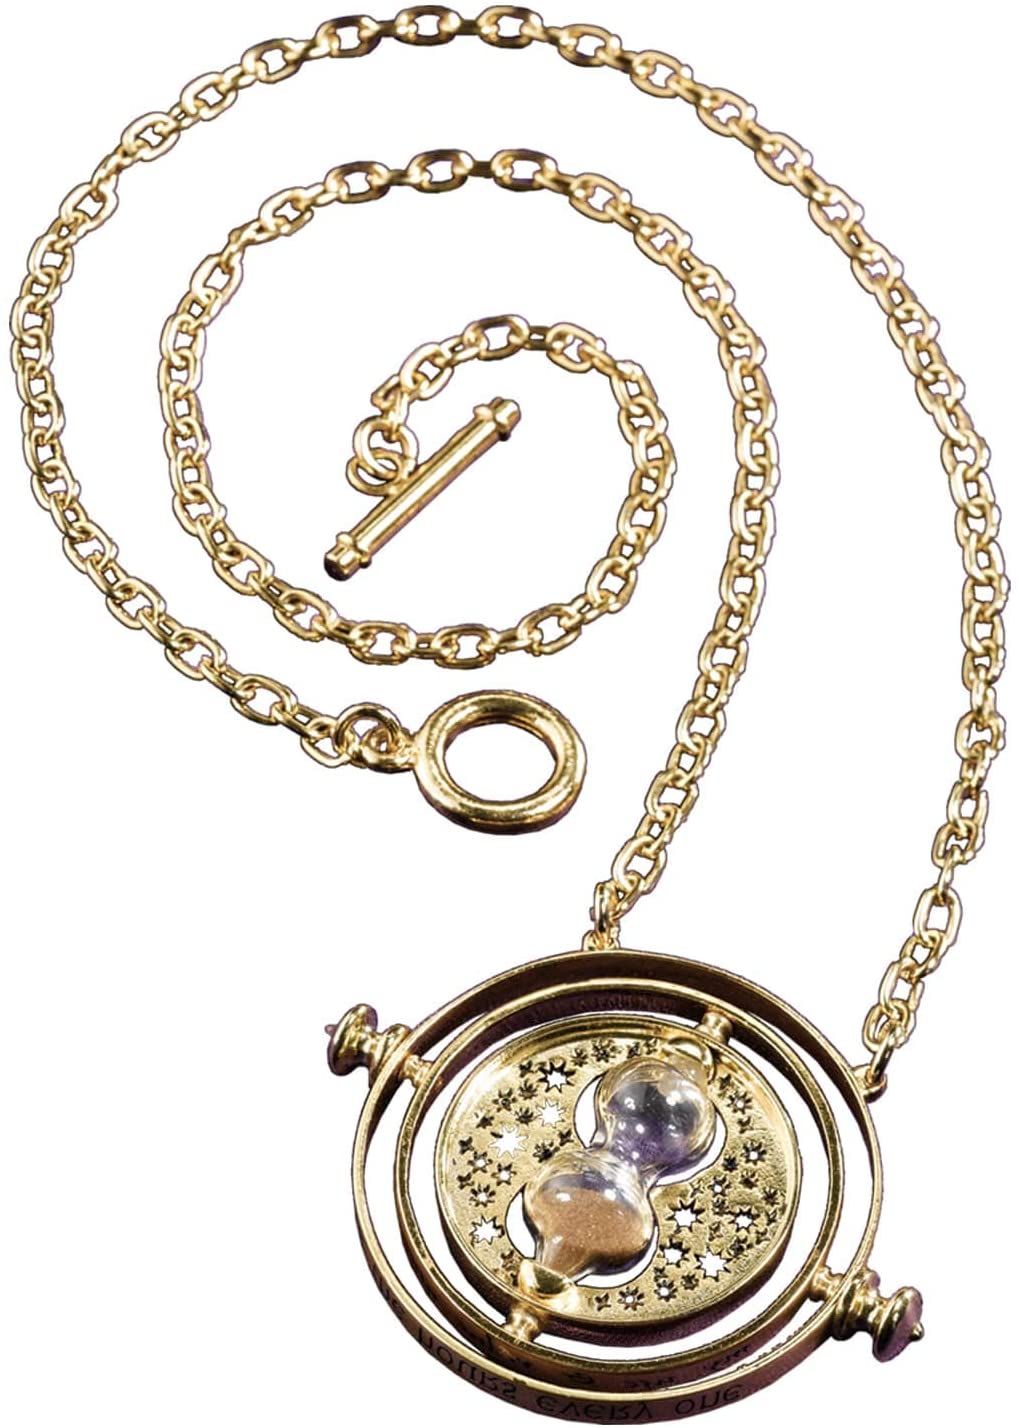 The Noble Collection Harry Potter Hermione’s Time Turner 24K Gold Plated - 1.4in (3.5cm) Includes 18" Chain & Display Box - Harry Potter Film Set Movie Props Gifts